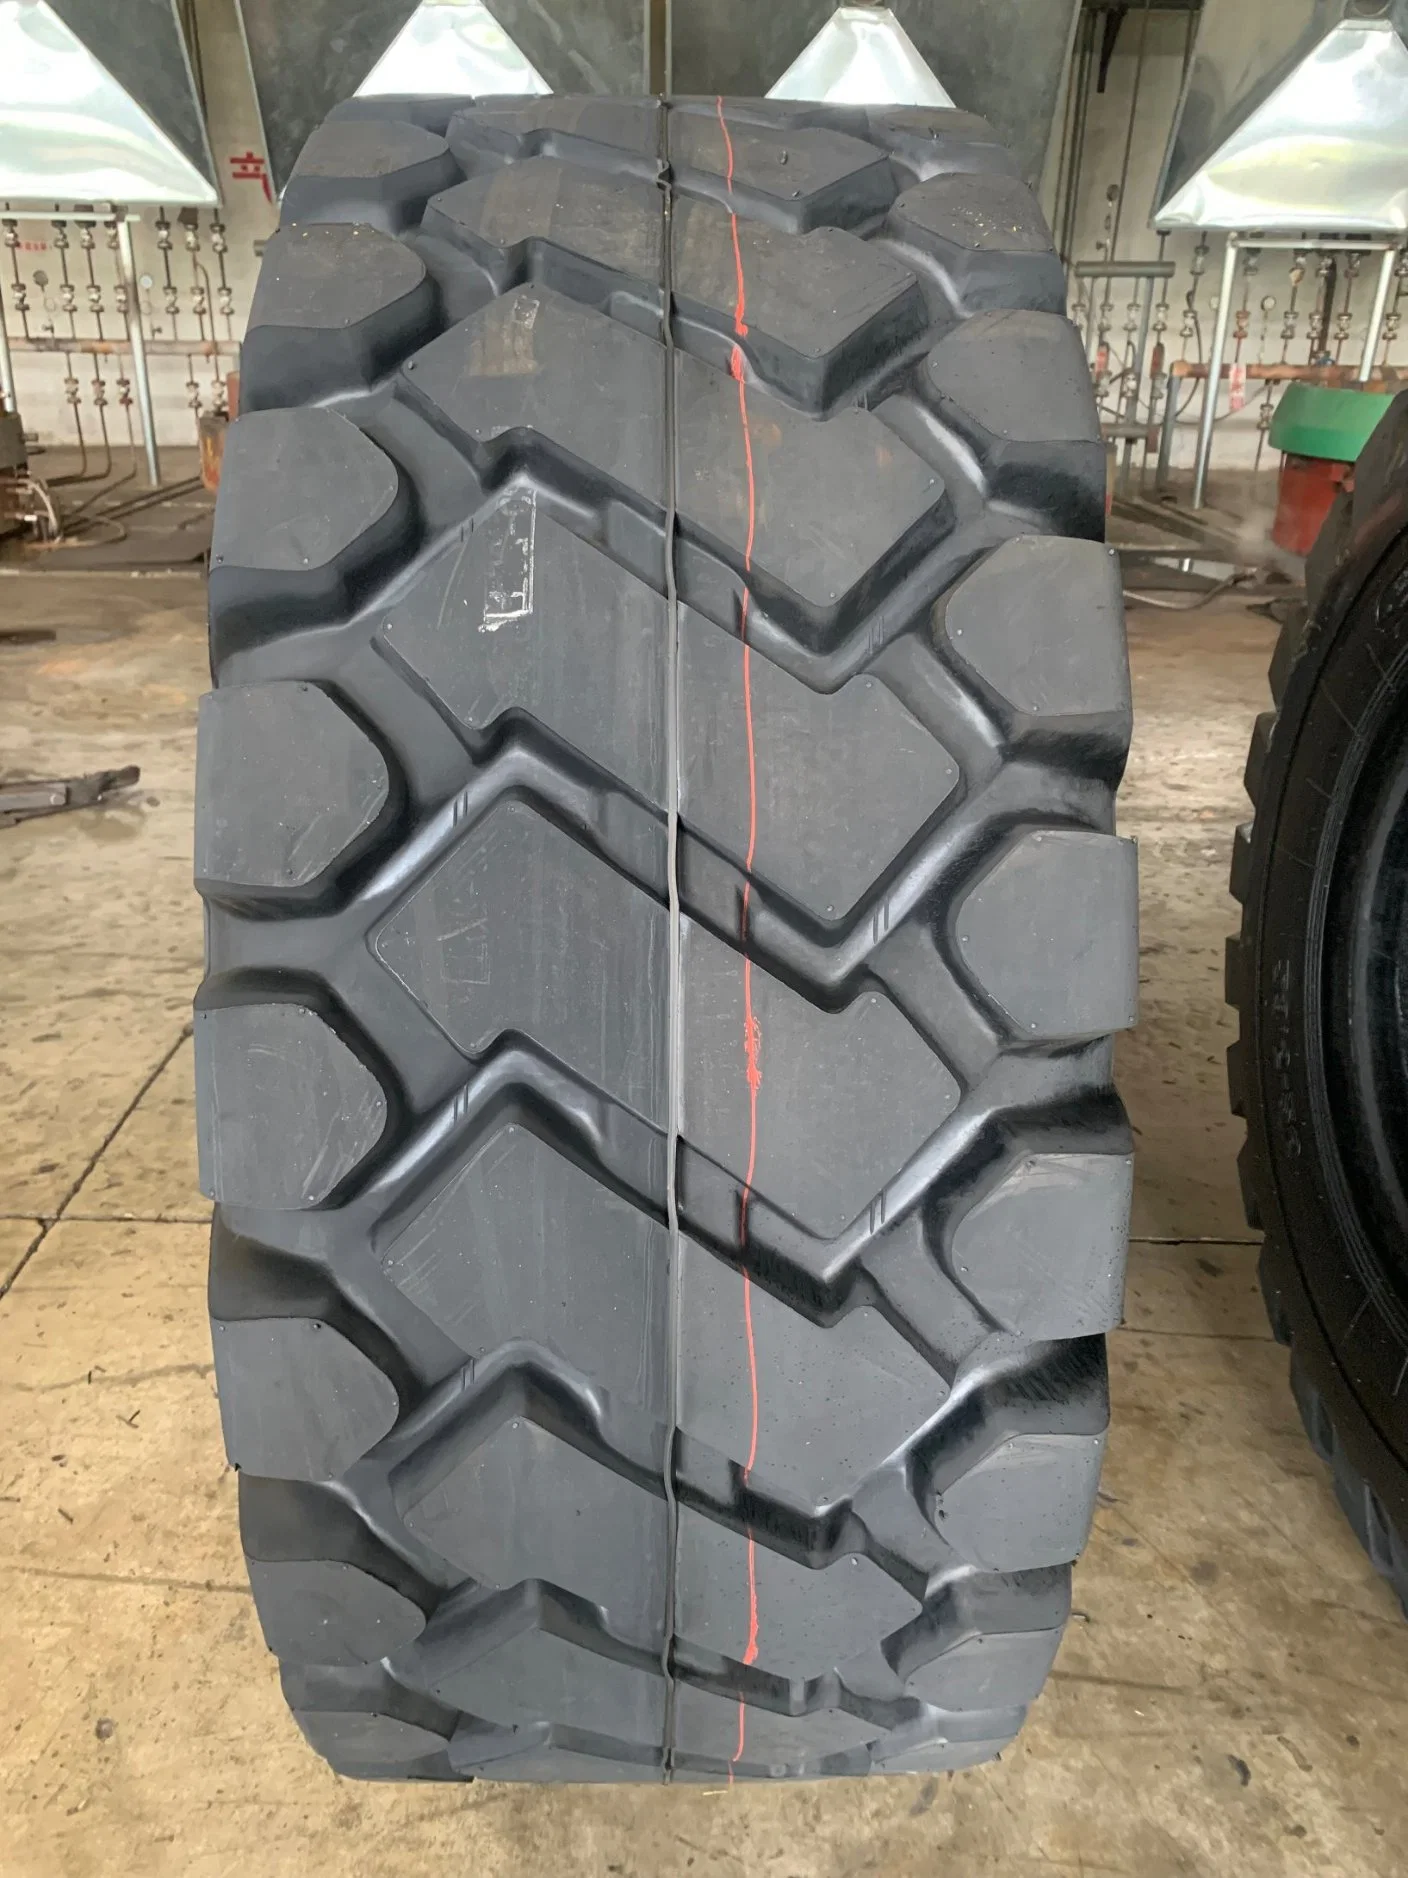 Radial Bias Solid off The Road Loader Grader Superhama Industrial OTR Wheels and Tyres with Rim (16.00 18.00 17.5 20.5 23.5 26.5 29.5 25 16/70-20 24) E3l3 L2 L5